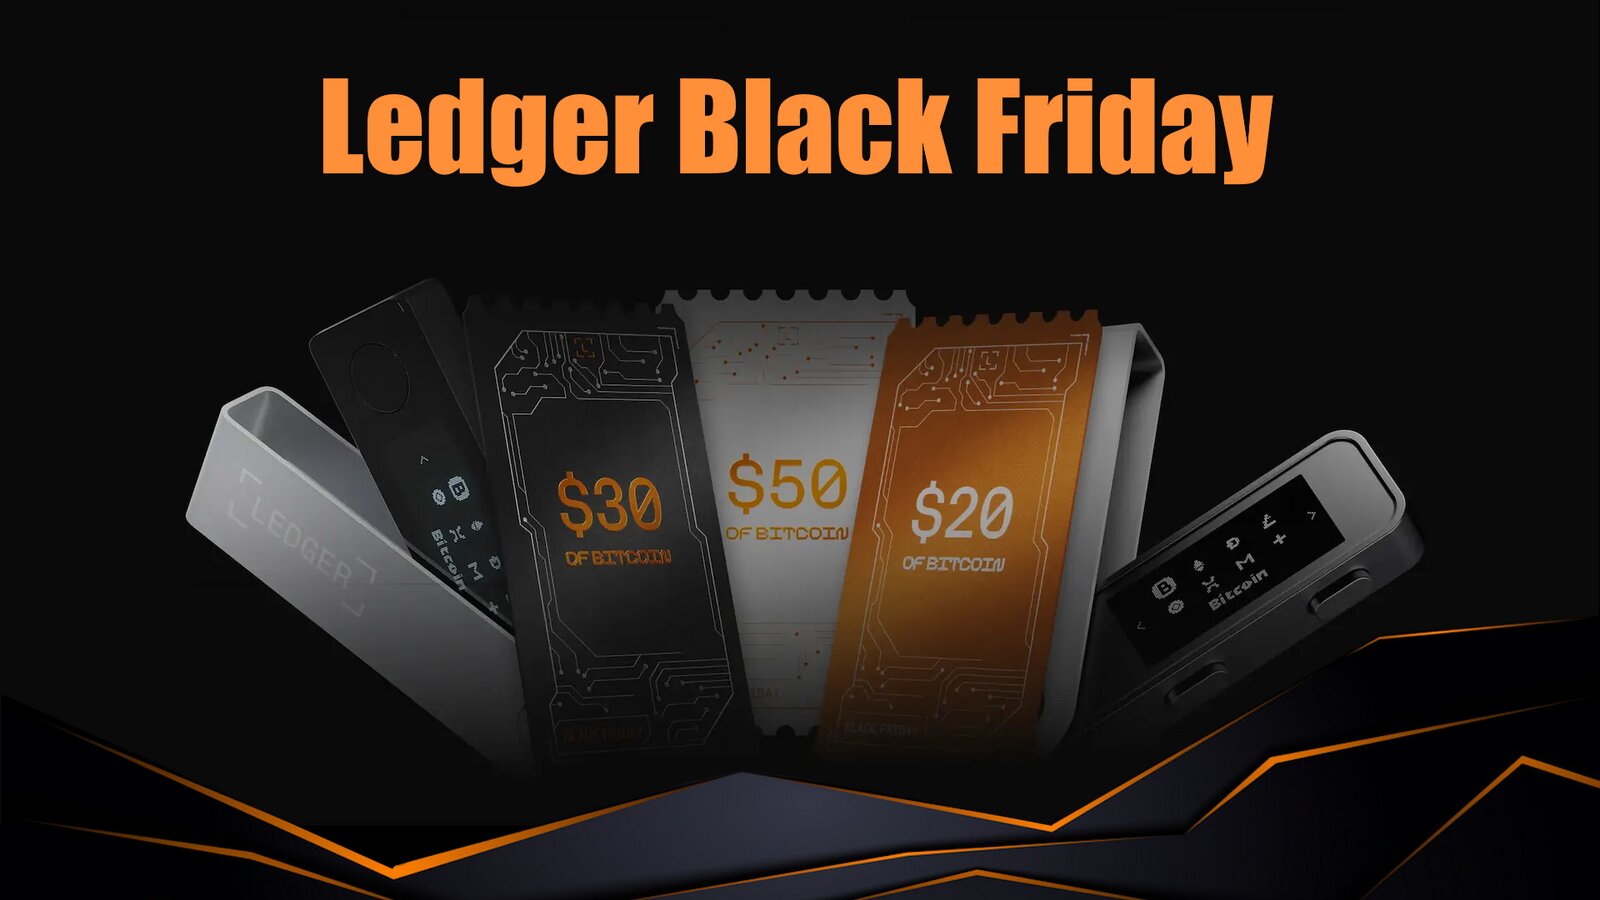 Ledger Black Friday Deal Free $30 in Bitcoin with Ledger Nano X